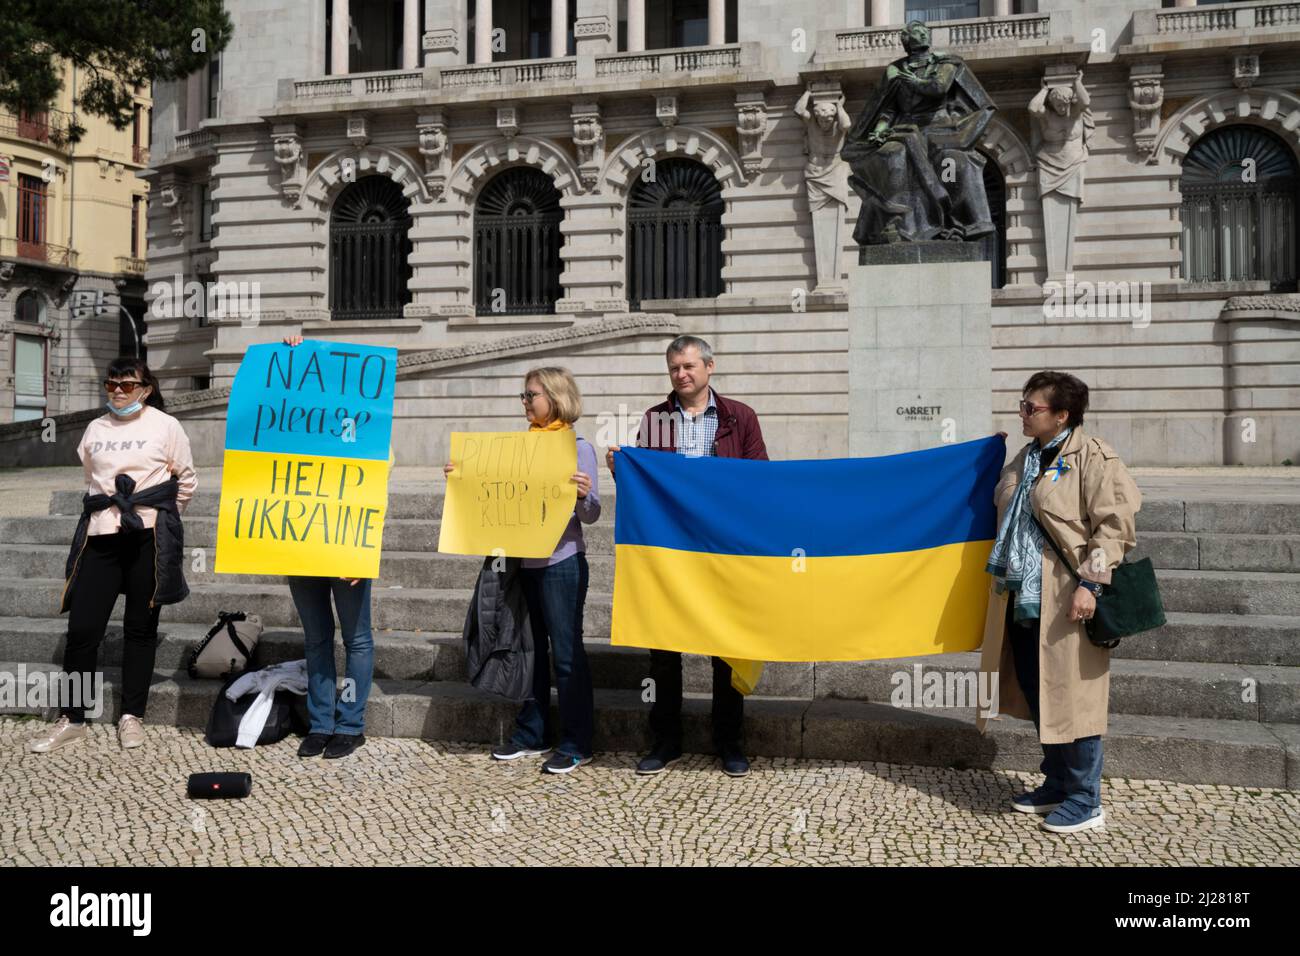 Porto, Portugal. March 20, 2022.  A group of Ukrainians demonstrating in support of Ukraine in front of the town hall in the city center Stock Photo